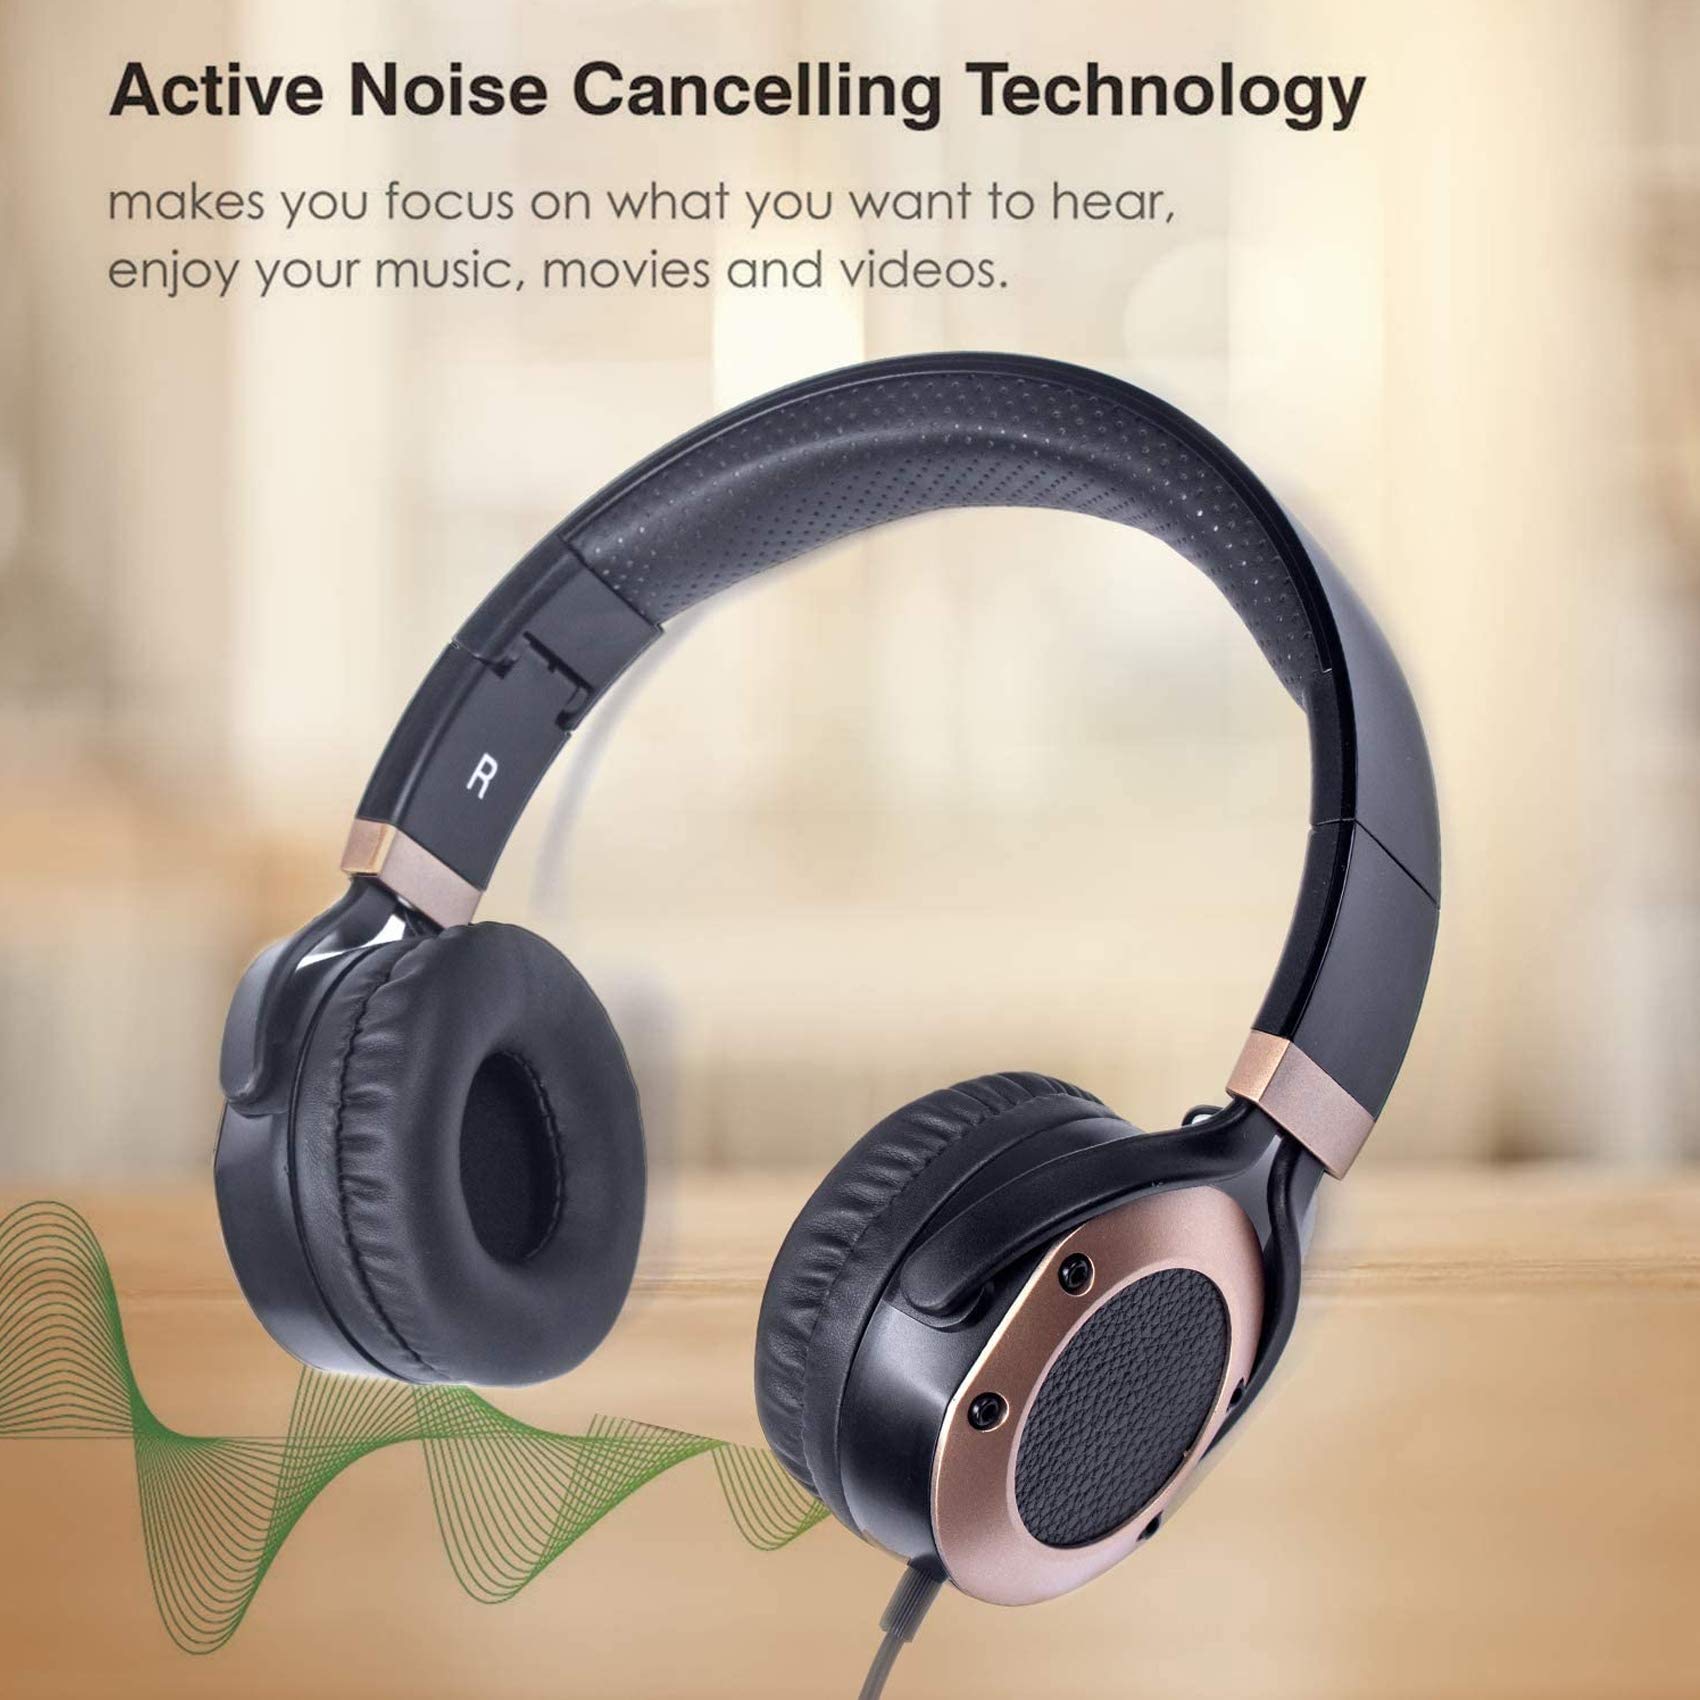 Active Noise Cancelling Headphones with Microphone and Airplane Adapter, Folding and Lightweight Travel Headsets, Hi-Fi Deep Bass Wired Headphones with Carrying Case